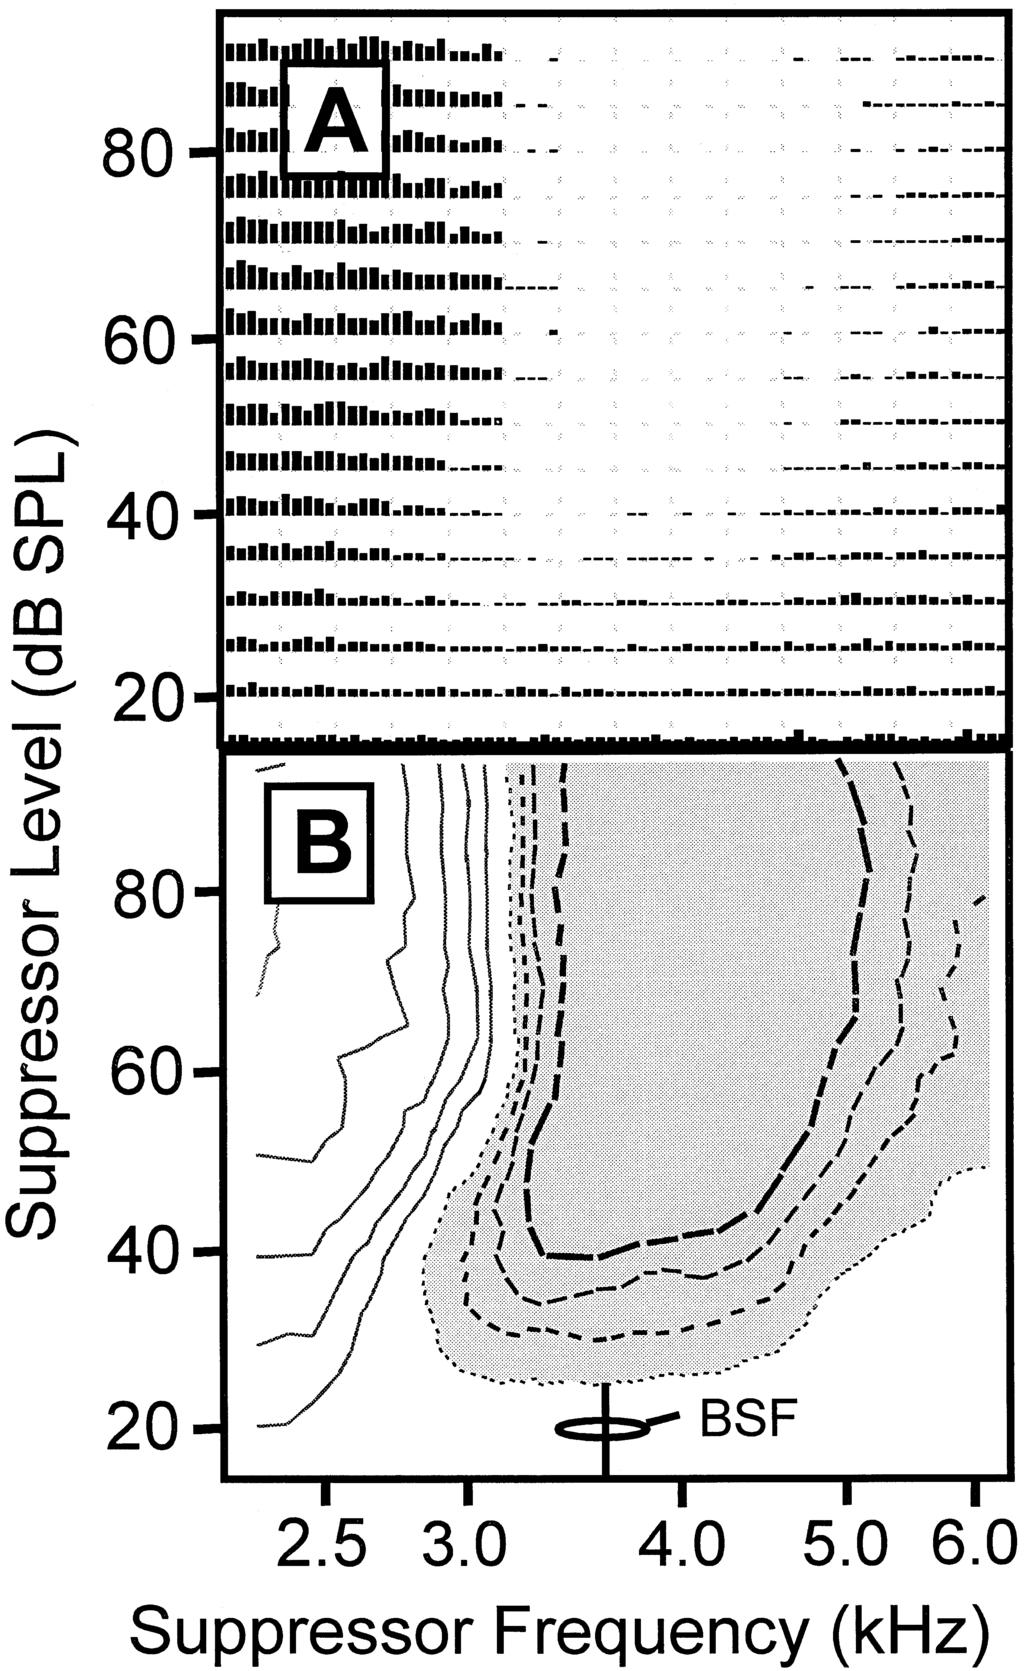 D.L. Konrad-Martin et al. / Hearing Research 121 (1998) 35^52 39 2.5. O -line data analyses The reduction of probe-driven discharge activity within a 2TS area (2TS magnitude) was analyzed in several ways.